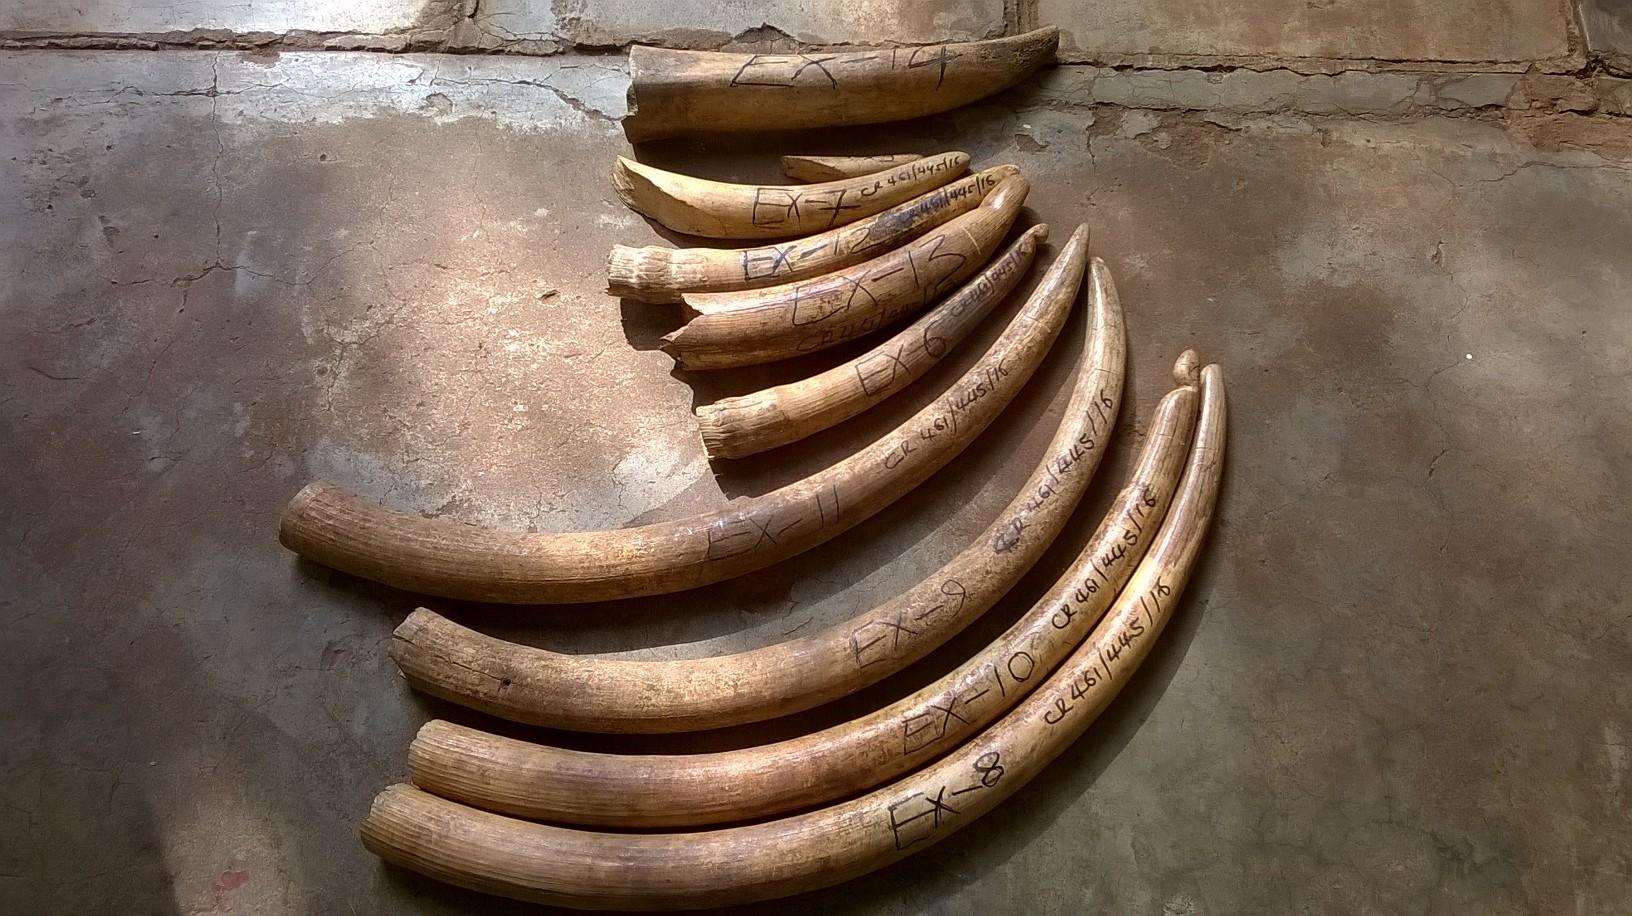 The ivory seized in a recent case in Kenya